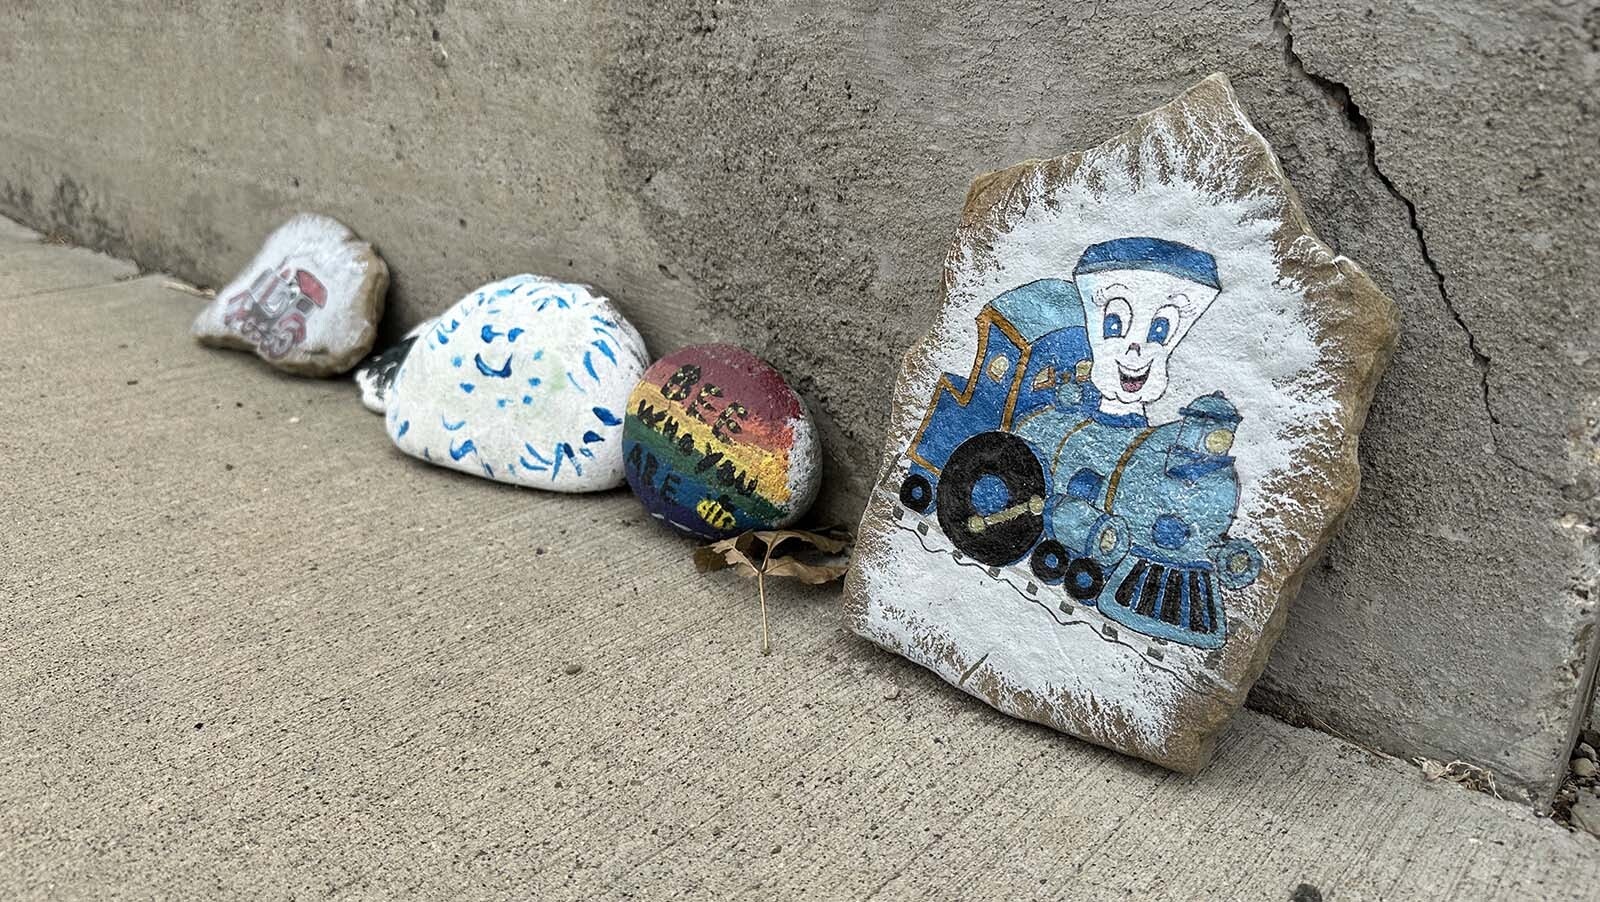 Jake the Train in Cody. Like many painted rock displays, the size changes all the time as rocks are added or taken away. So long as something is leading the way, a painted rock can be added to the line or end up in a pocket or in someone's home as a personal memento.